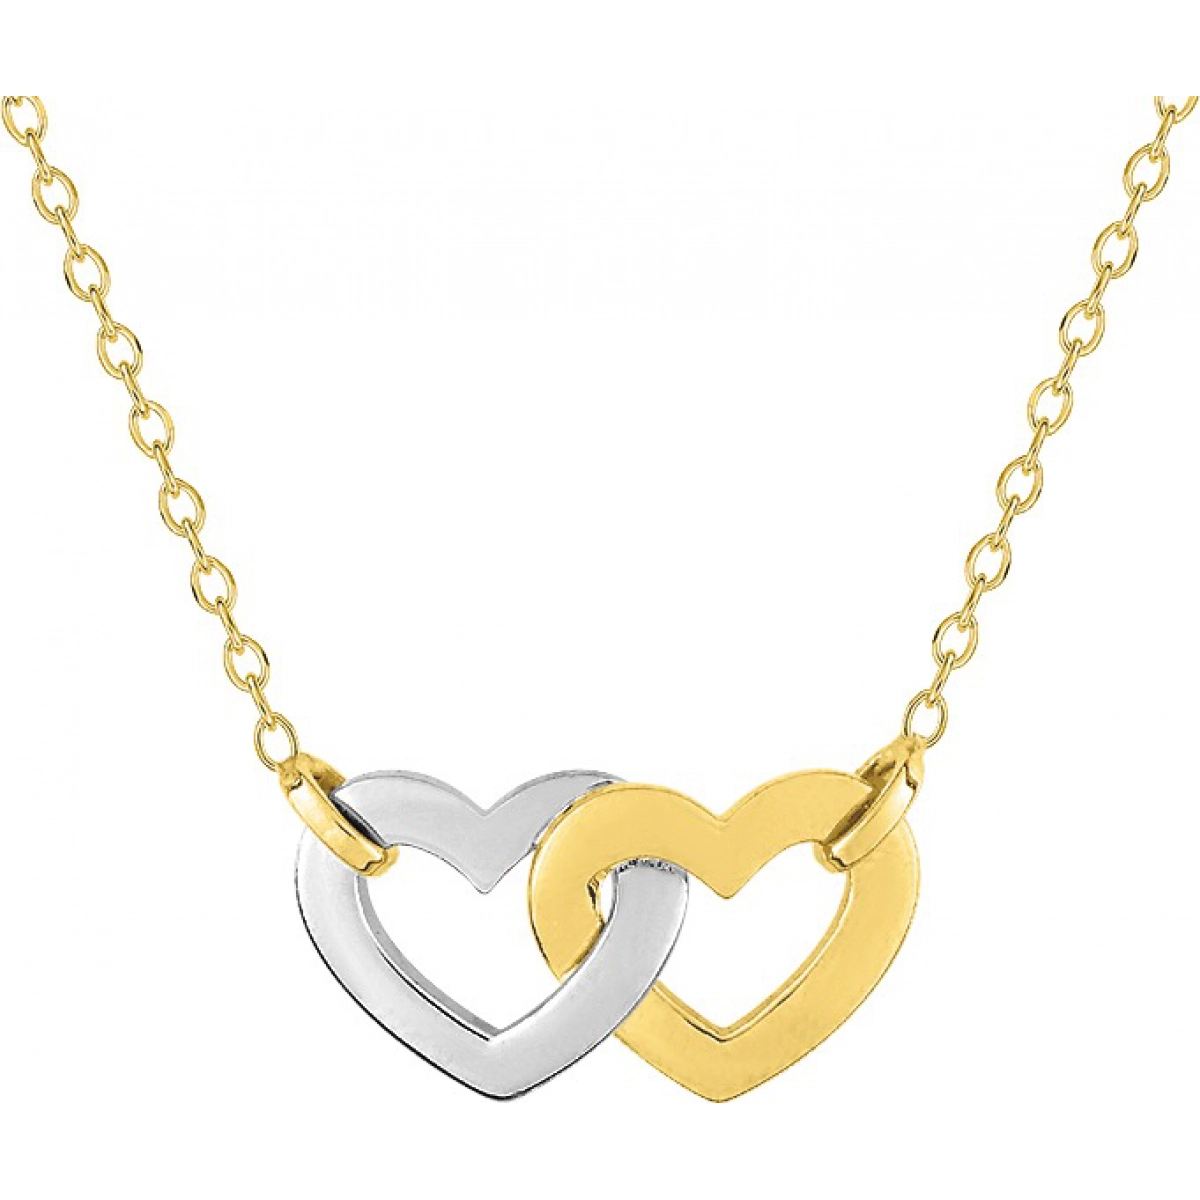 Necklace 40+5cm gold plated Brass 2TG  Lua Blanca  BACA8240.0